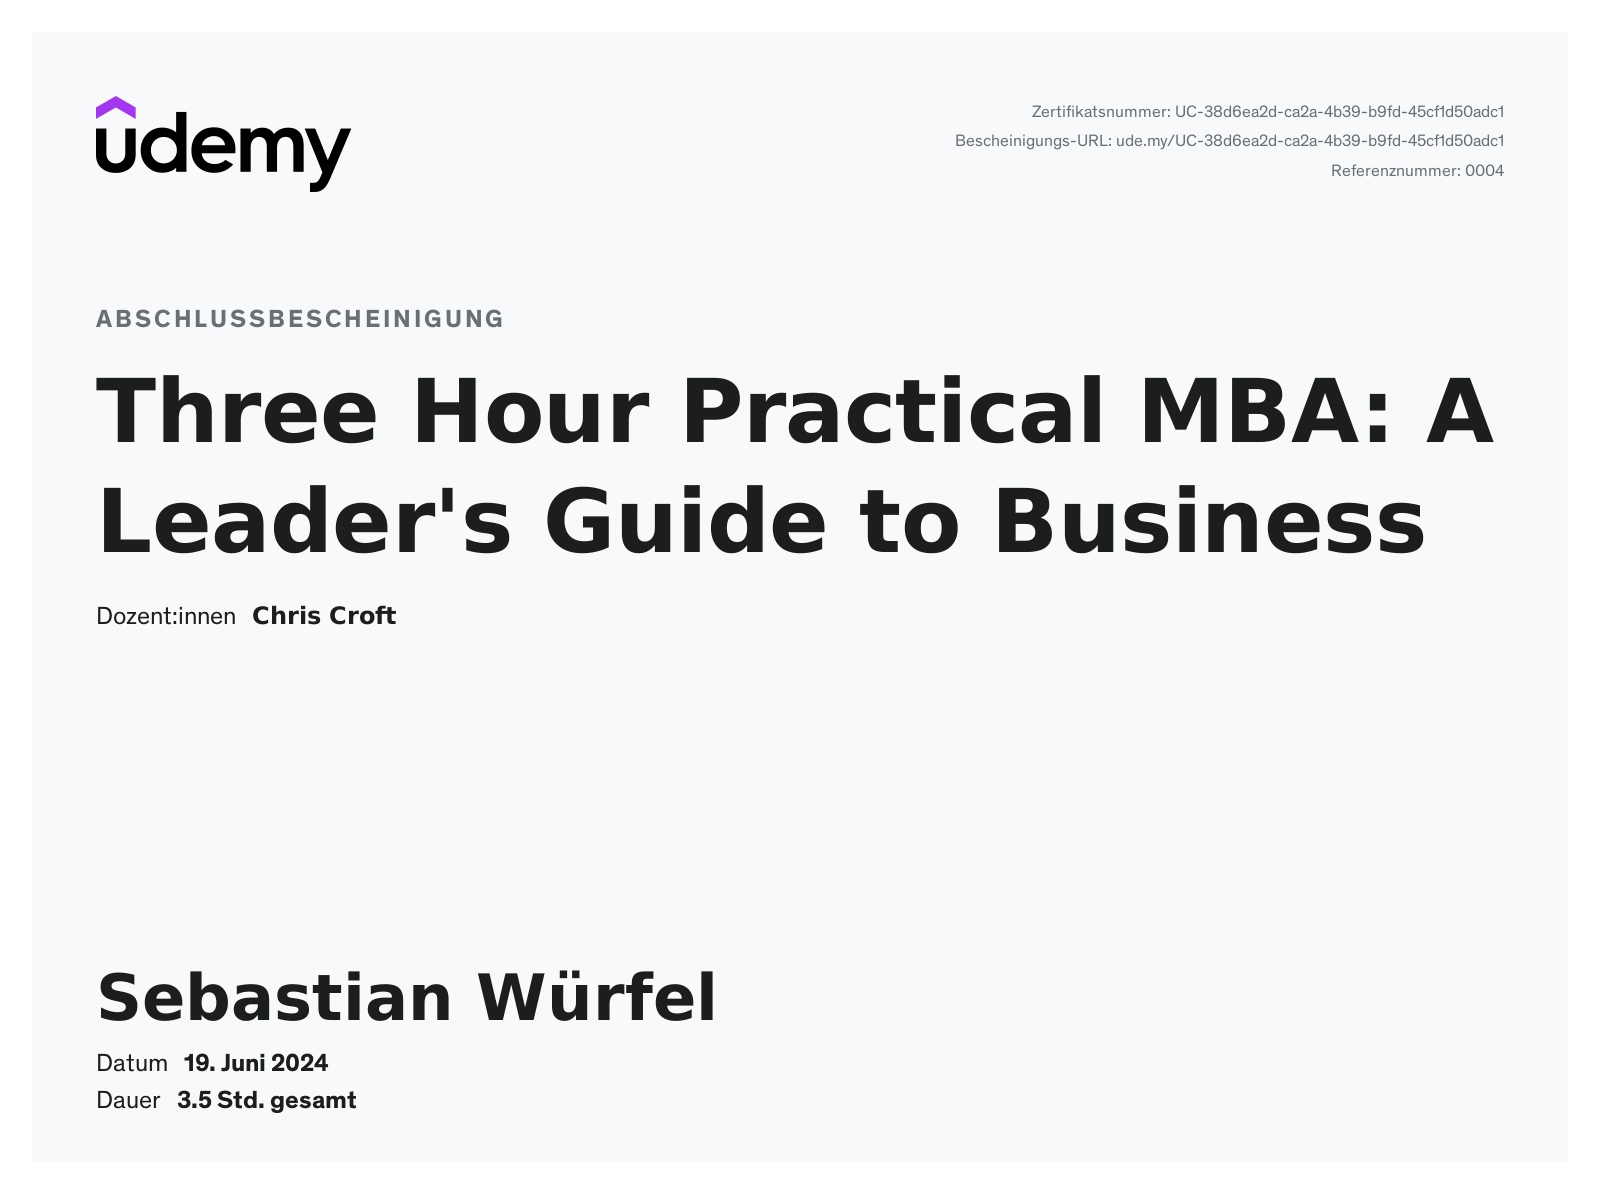 Udemy 3 Hours Practical MBA Course Certificate